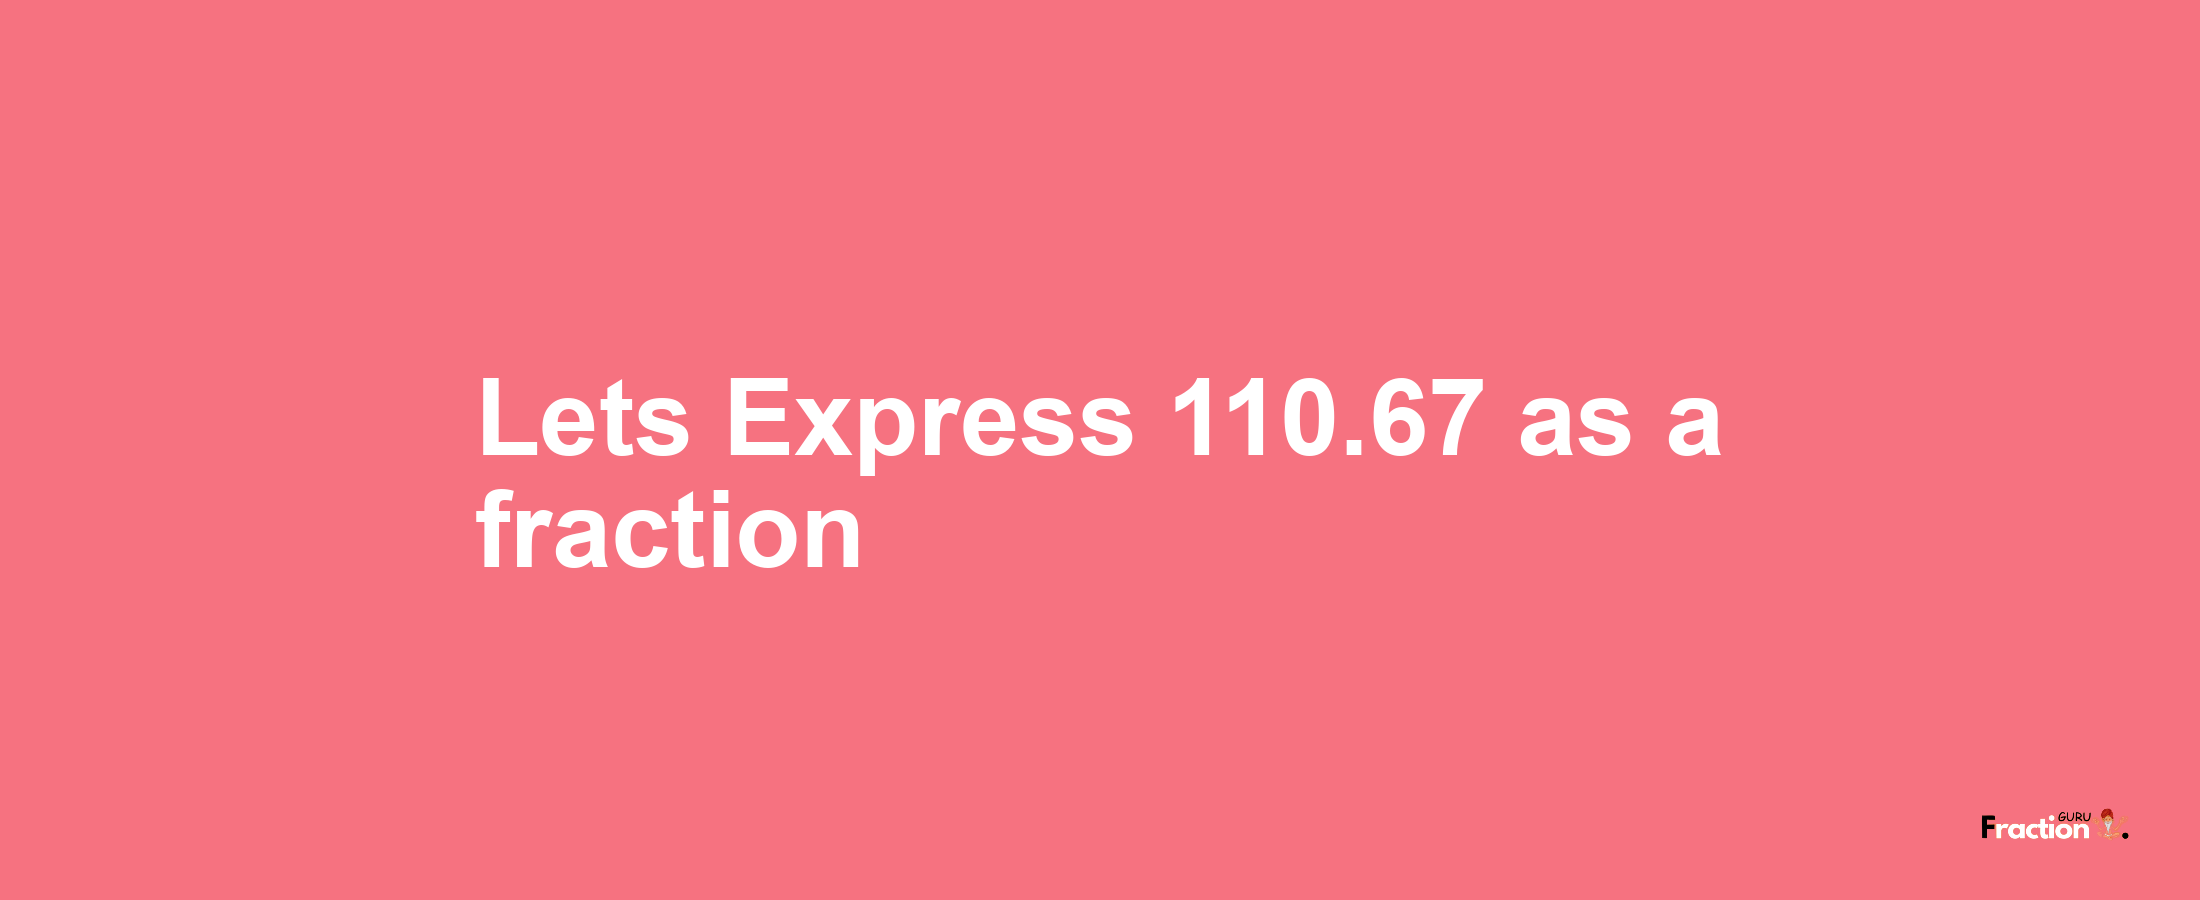 Lets Express 110.67 as afraction